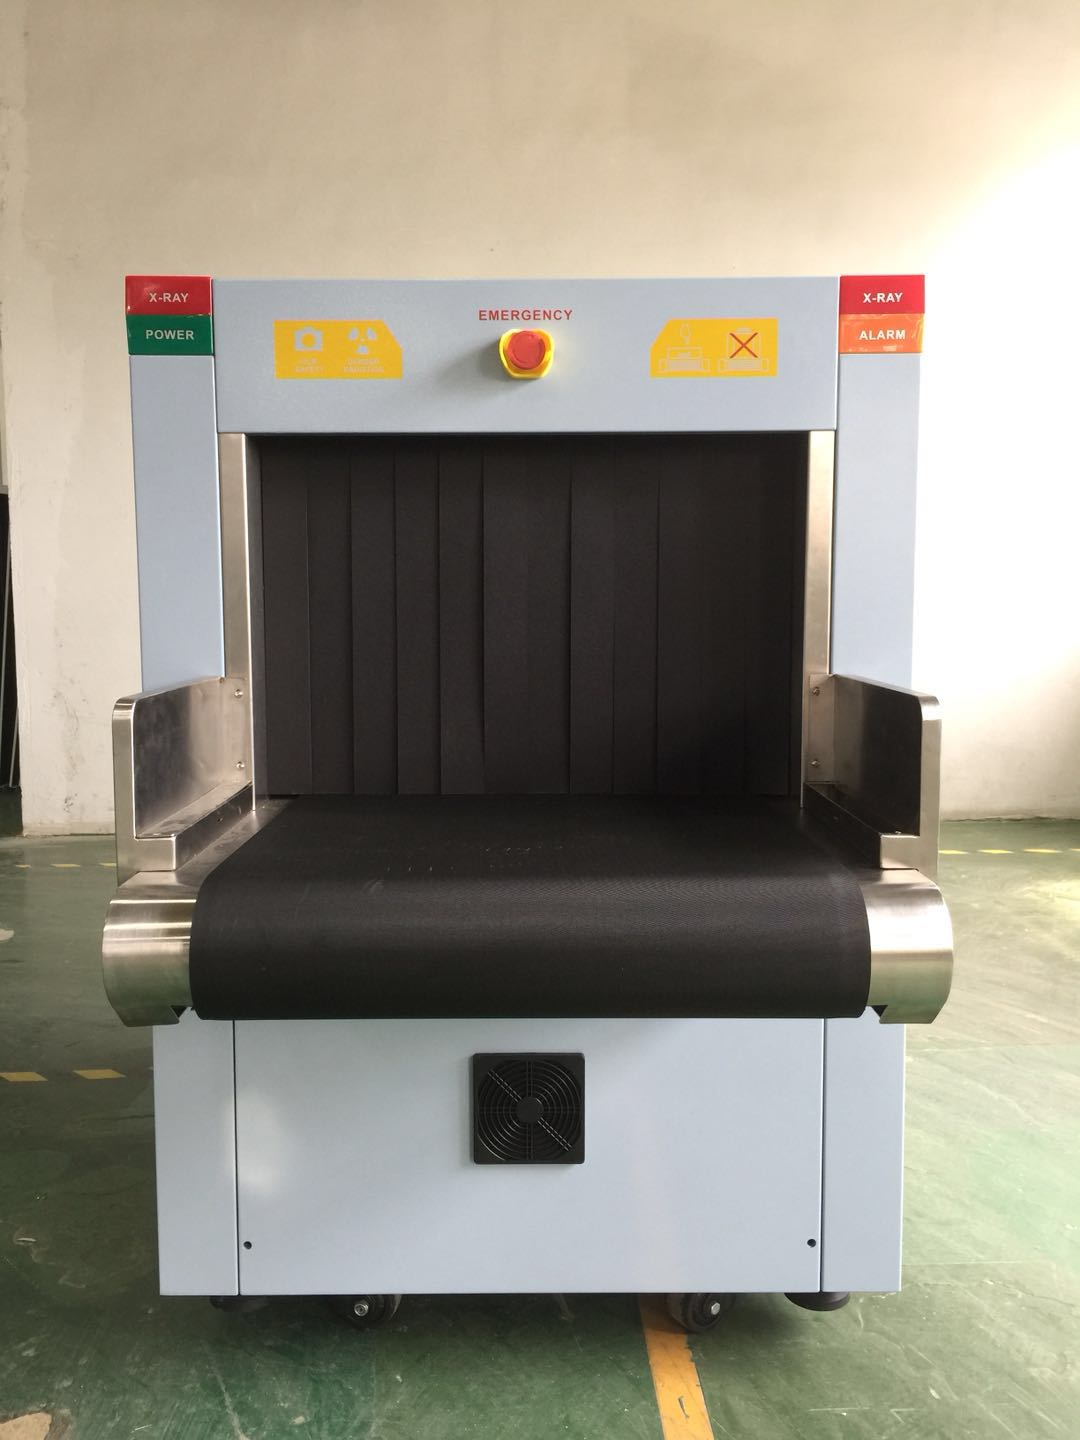 X Ray Luggage Scanning System 21.5'' Monitor Display In Buidling Entrance